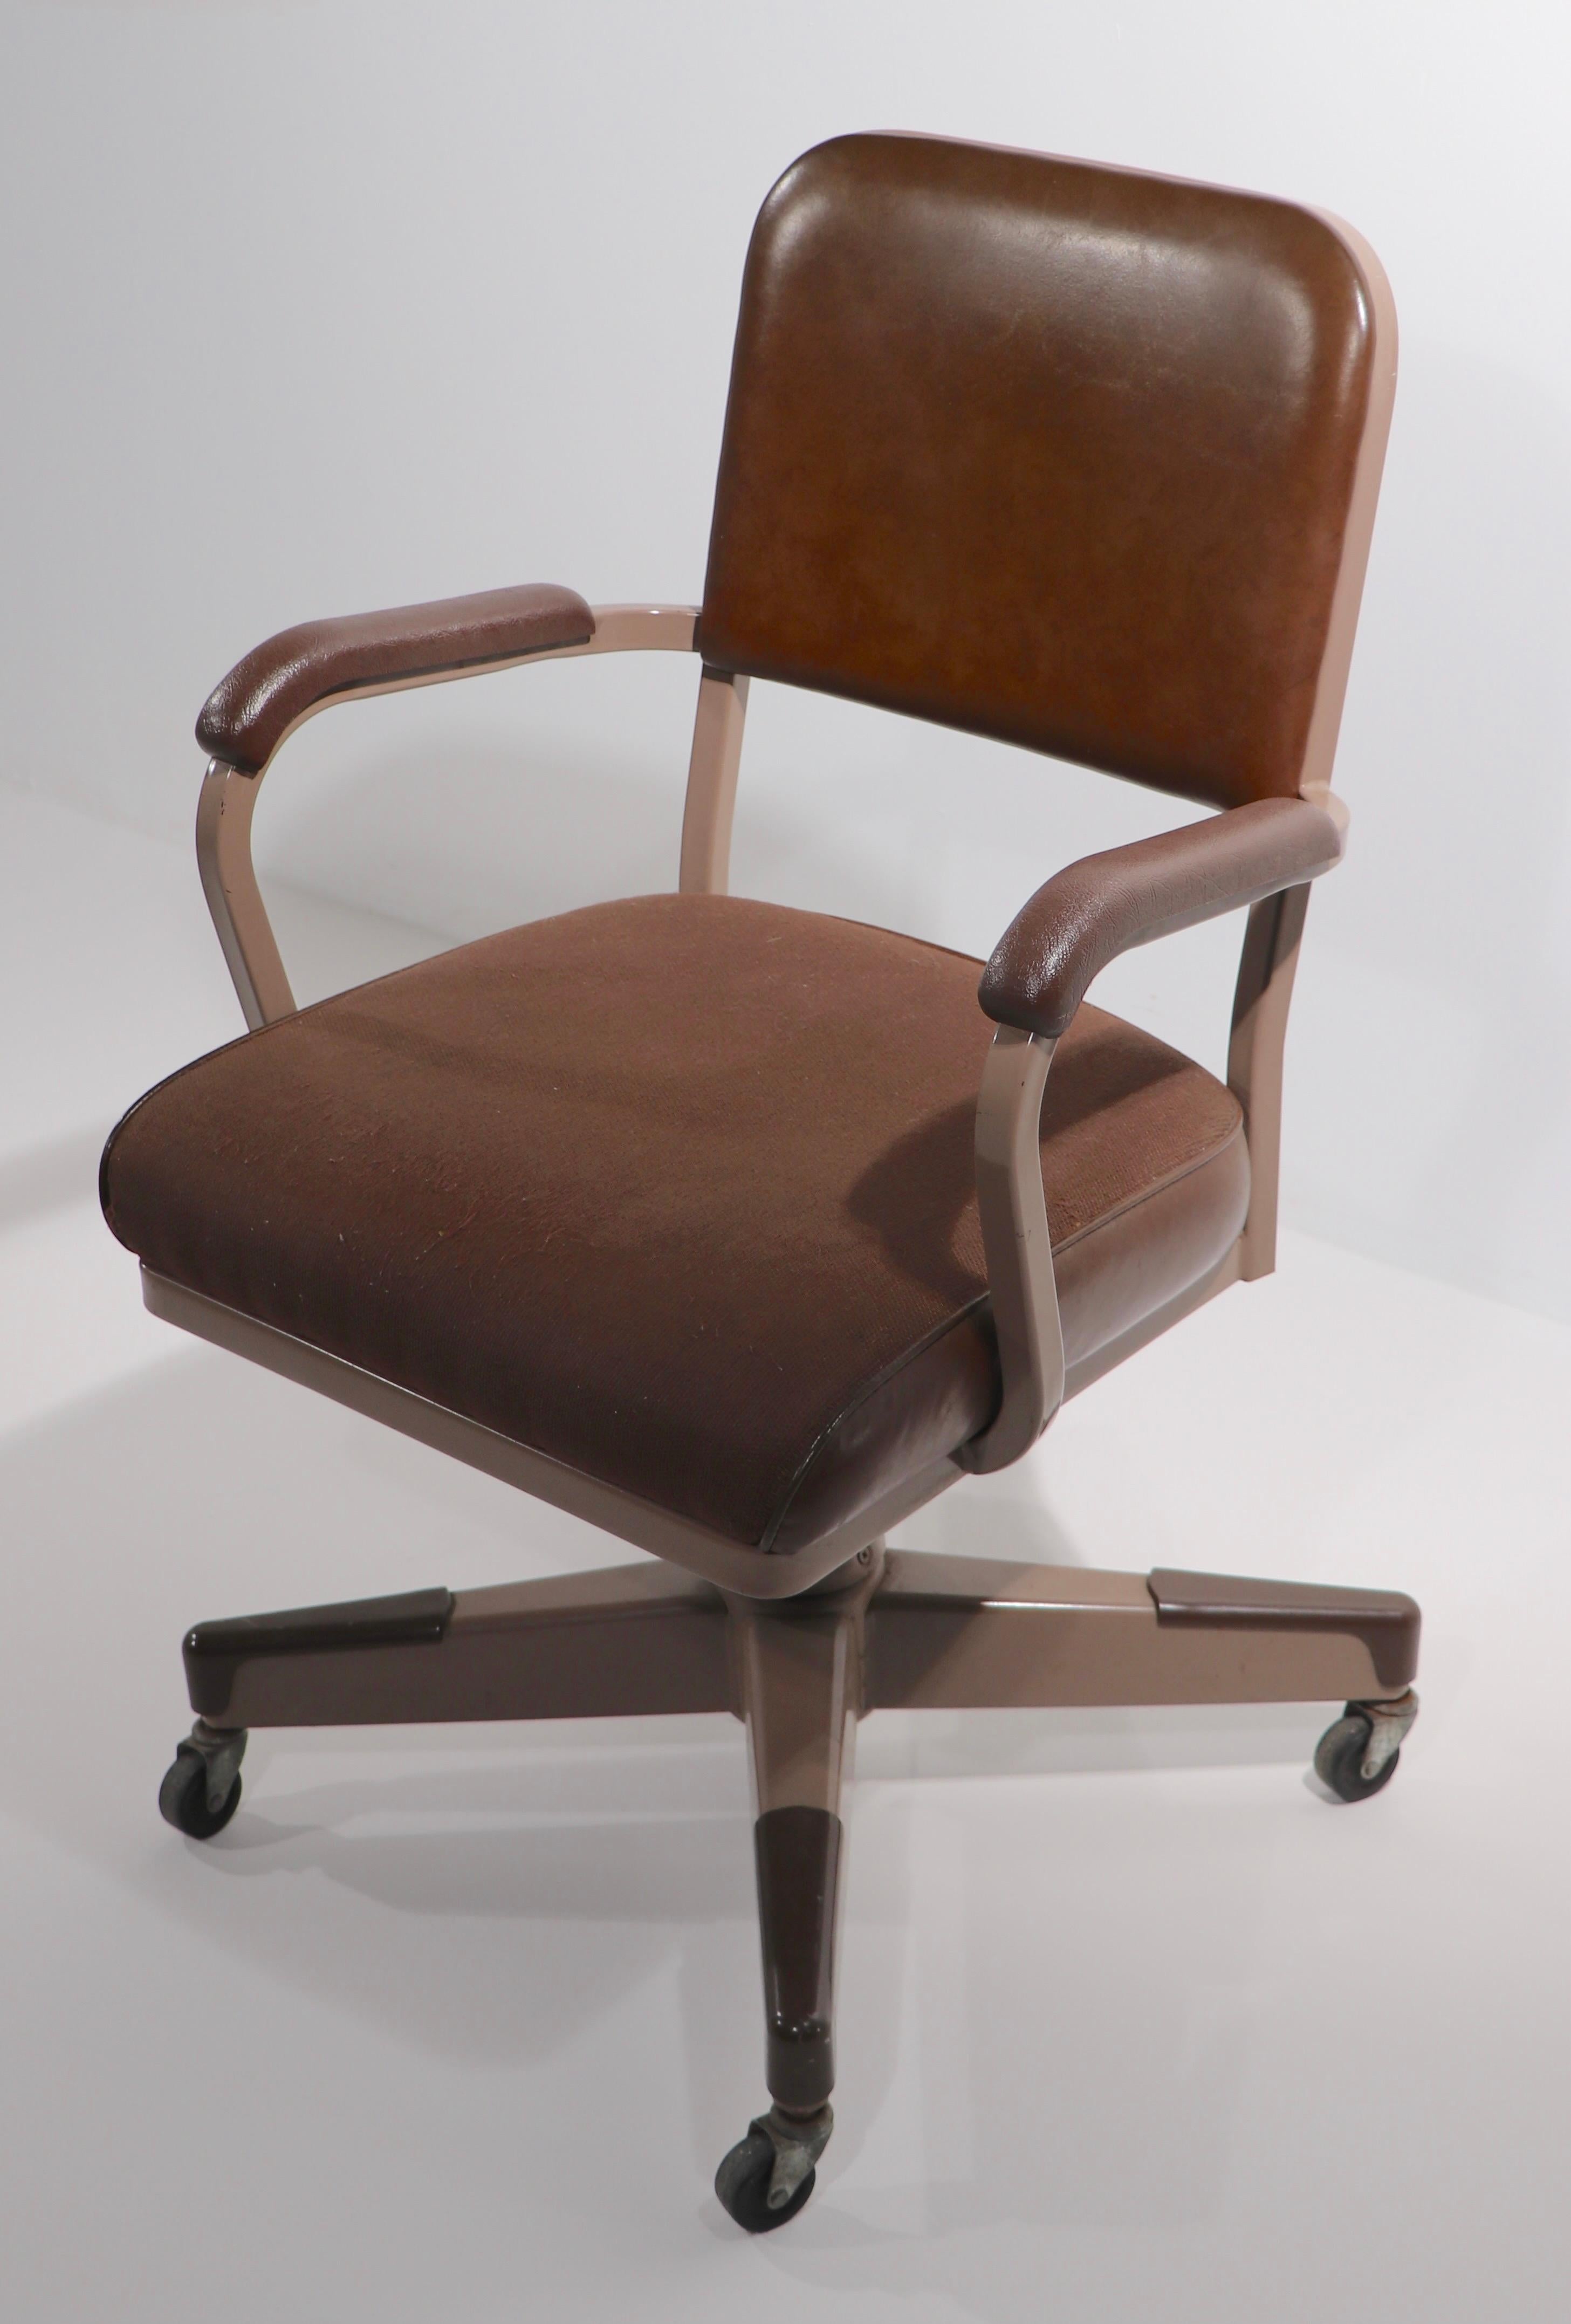 Mid century swivel, tilt office, desk chair in very fine, original condition, clean and ready to use. The chair has a light brown metal frame with darker brown seats back and arm rests. The seat rotates, and tilts, the base is on wheels, the seat is